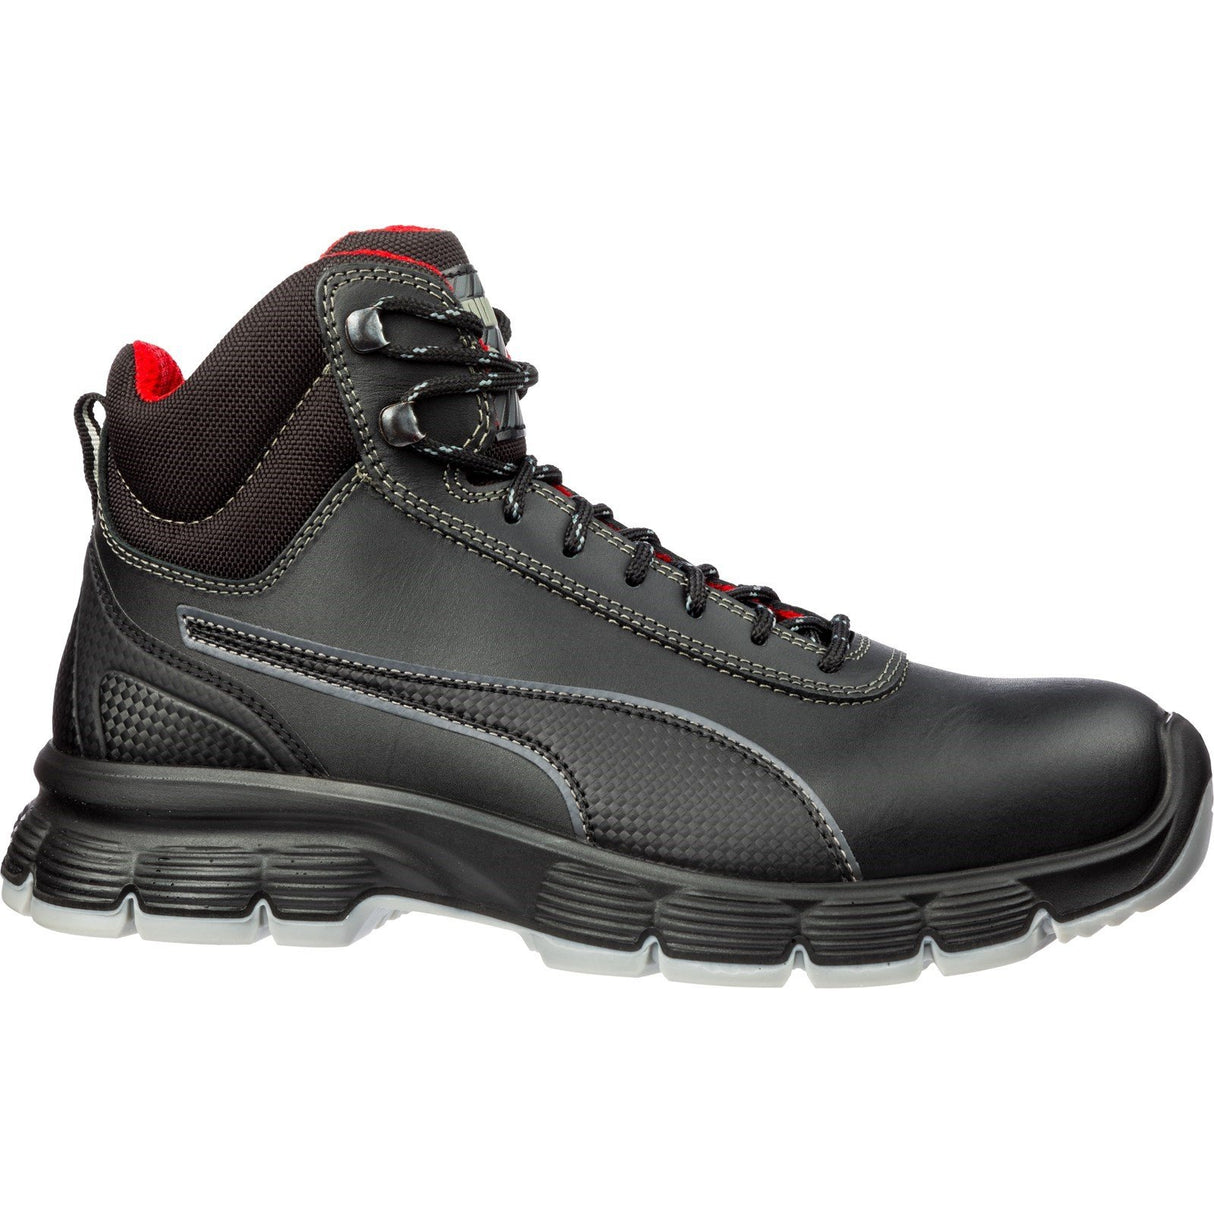 Puma Safety Condor Mid S3 Safety Boots